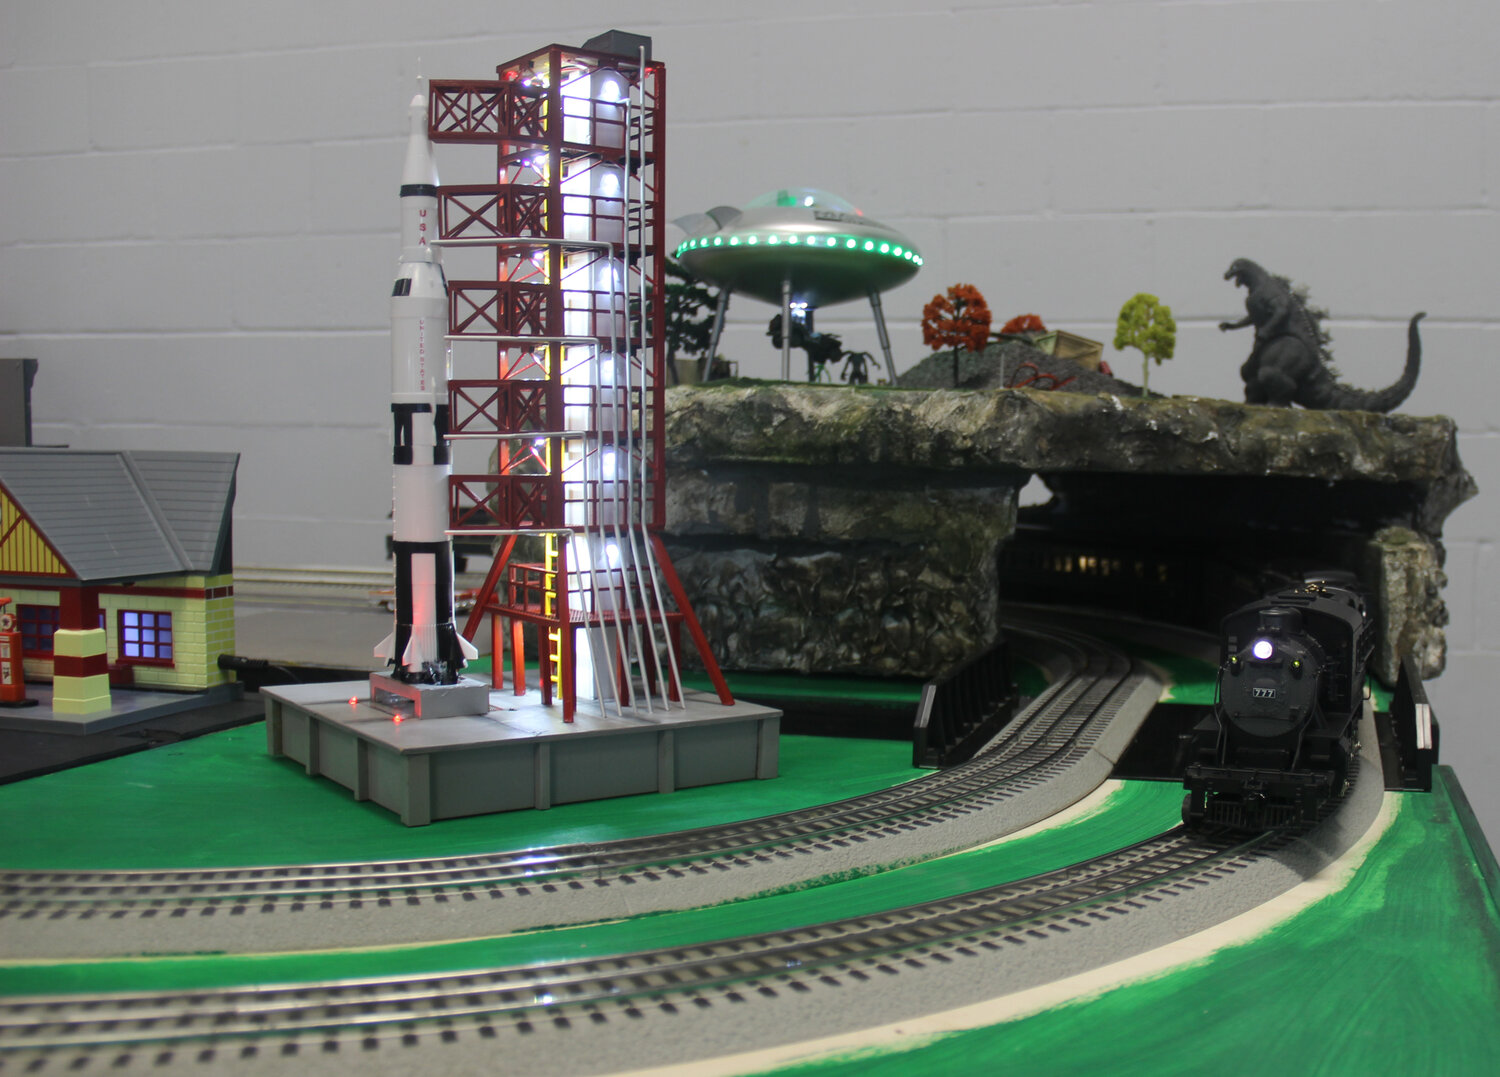 A model train set was up and running in the MaryLou Community Center during Summerfest.